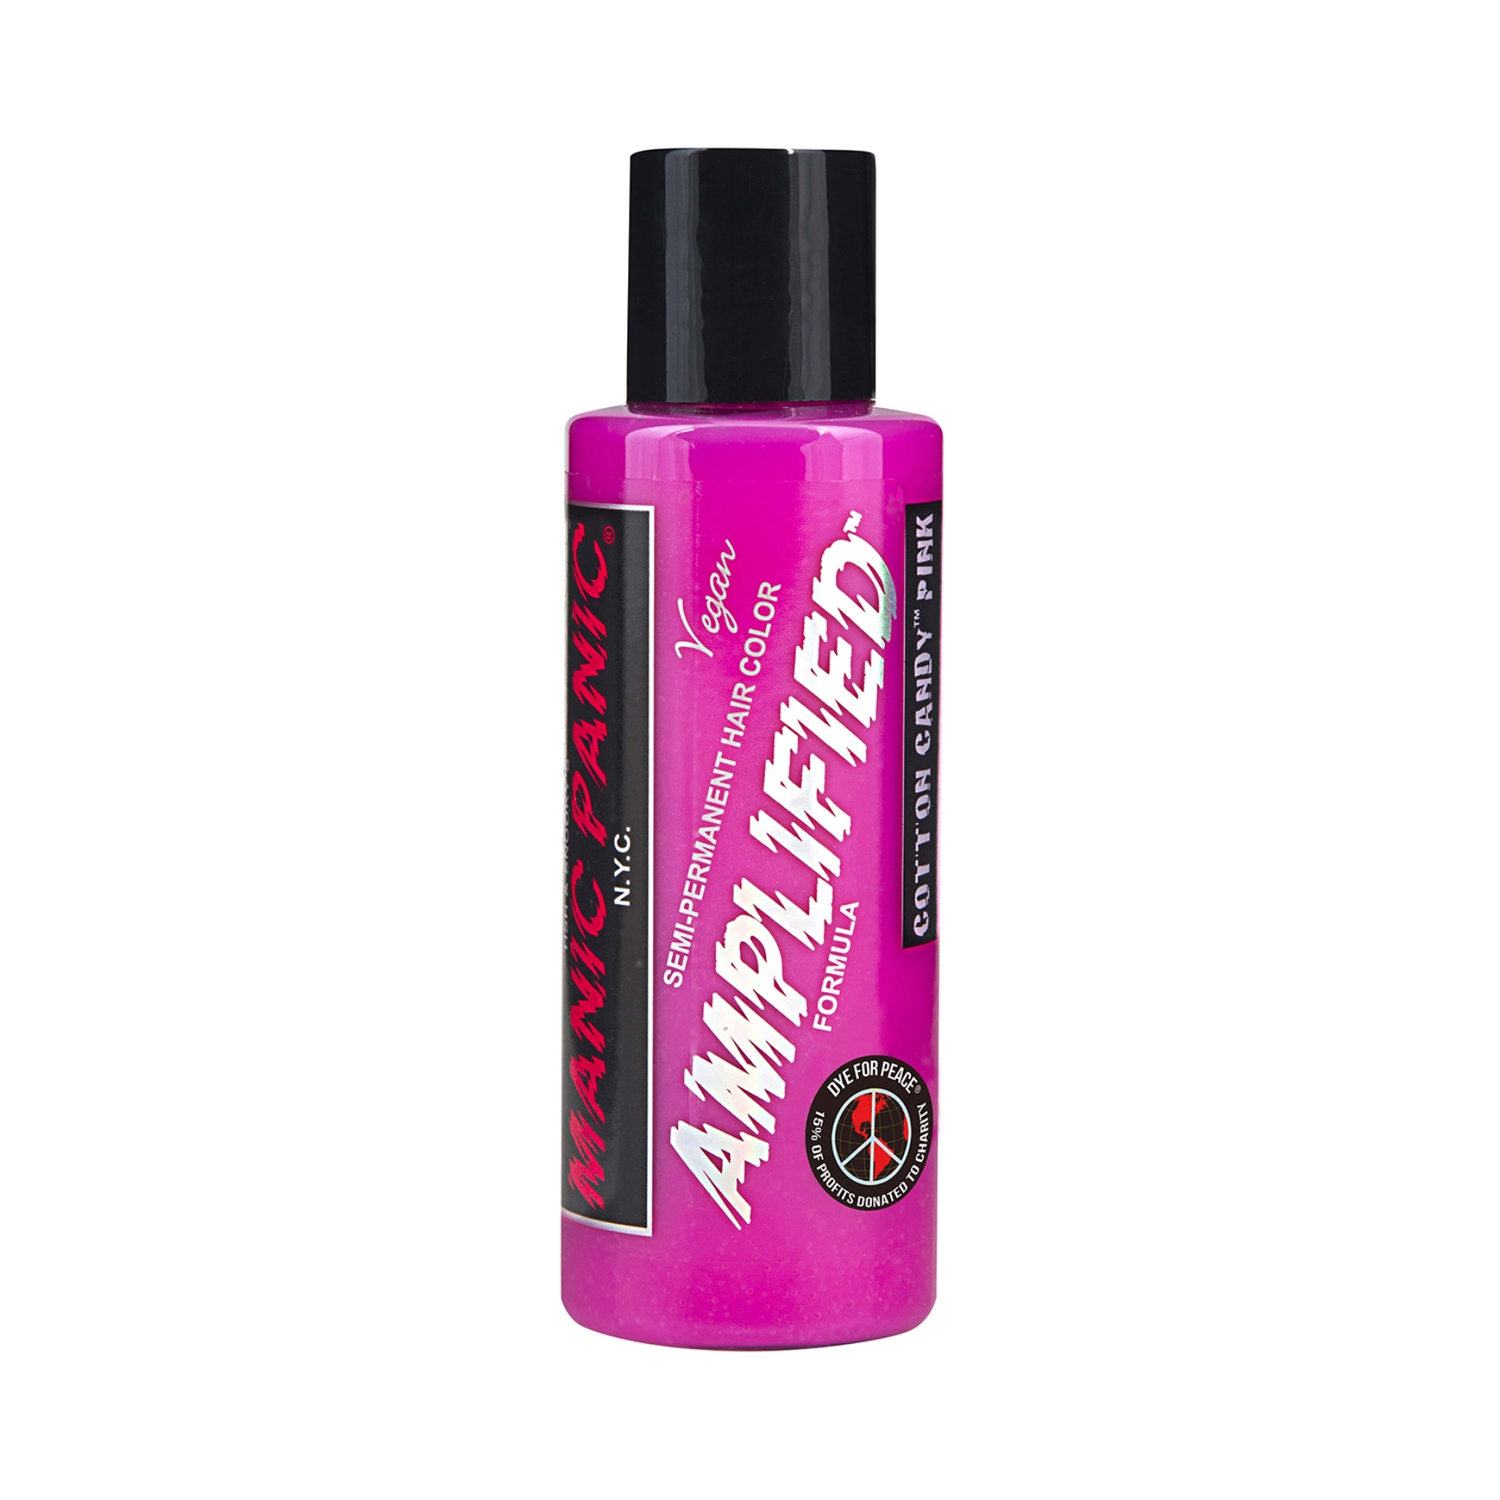 Manic Panic Amplified Semi Permanent Hair Color - Cotton Candy (118ml)